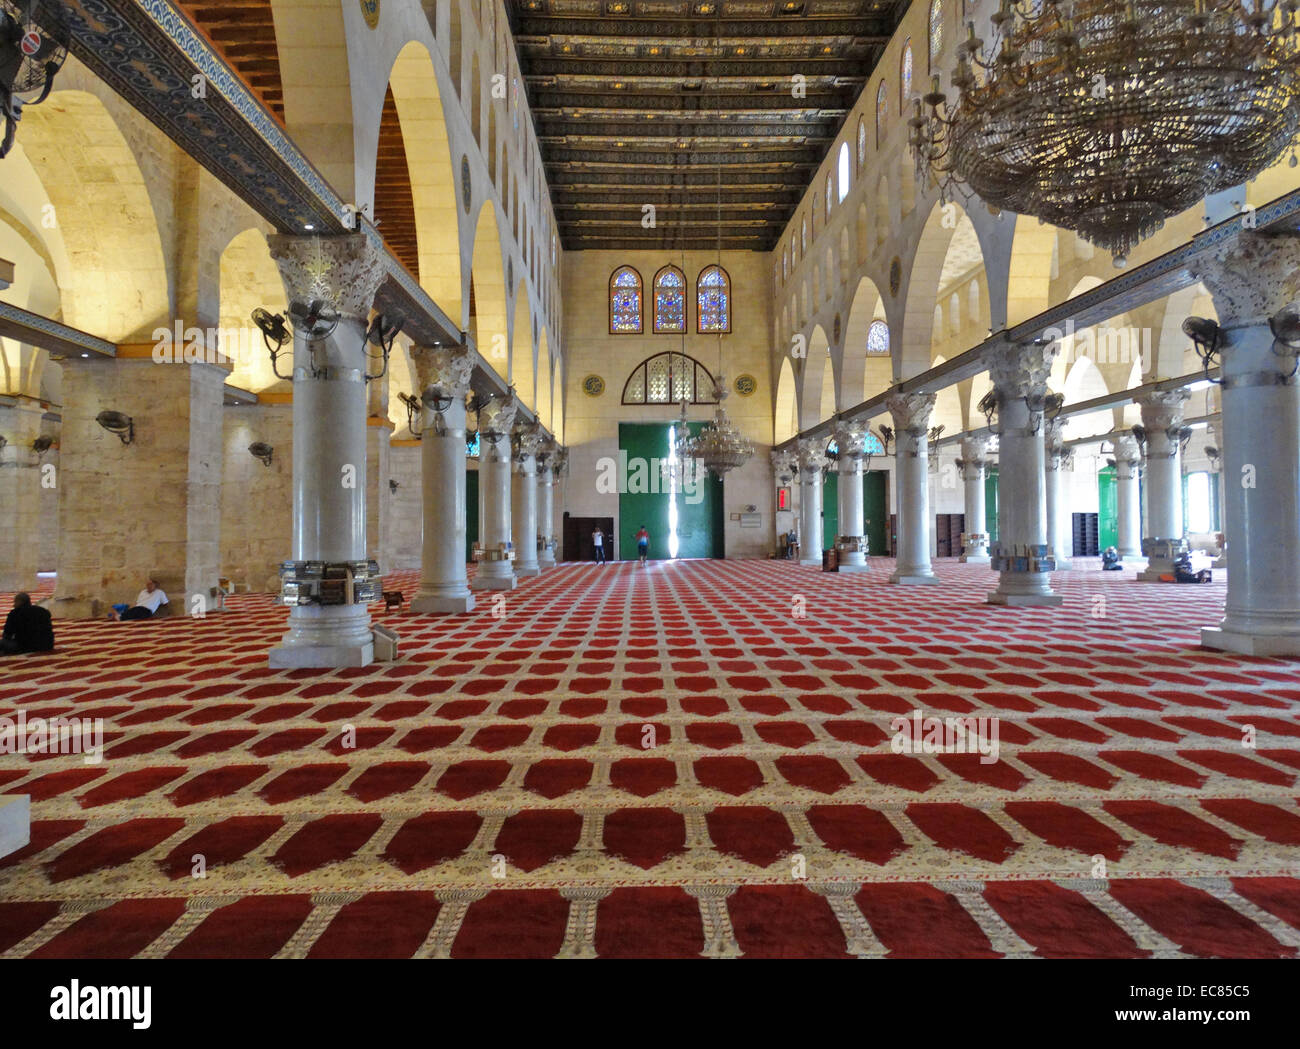 Prayer mat in the Al-Aqsa Mosque: the third holiest site in Islam and is located in the Old City of Jerusalem. Stock Photo